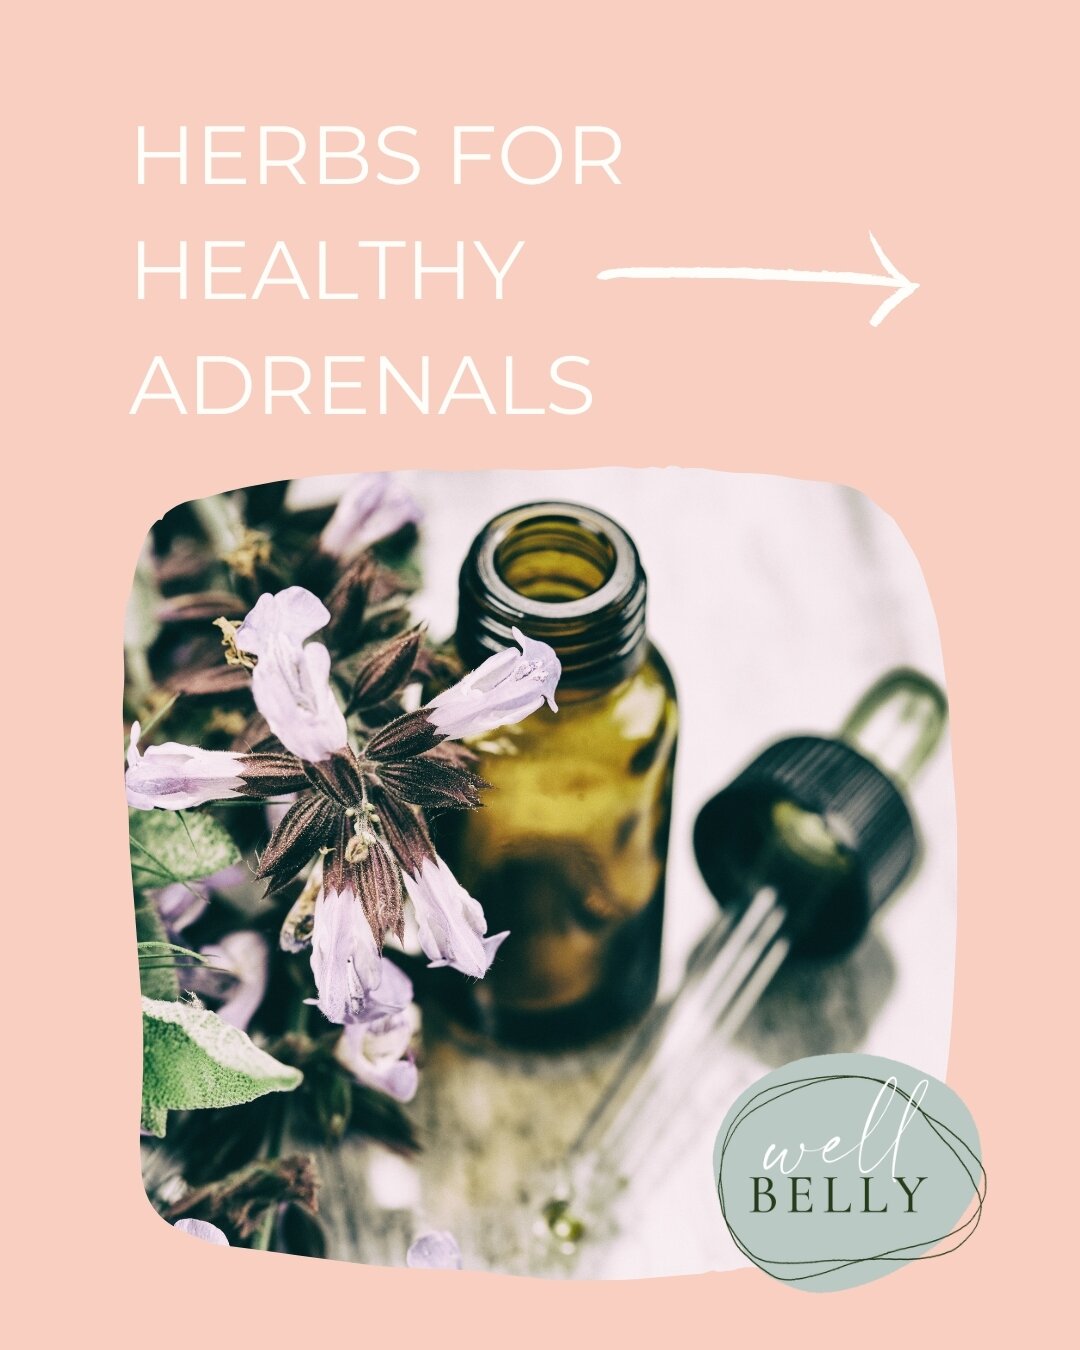 🌿 Some of our favourite adrenal loving herbs picked by our naturopath @becthenaturopath 🌿

Rehmannia - restorative to the adrenal glands and gently nourishes them back to health

Withania - regulates the imbalanced cortisol level and nourishing the